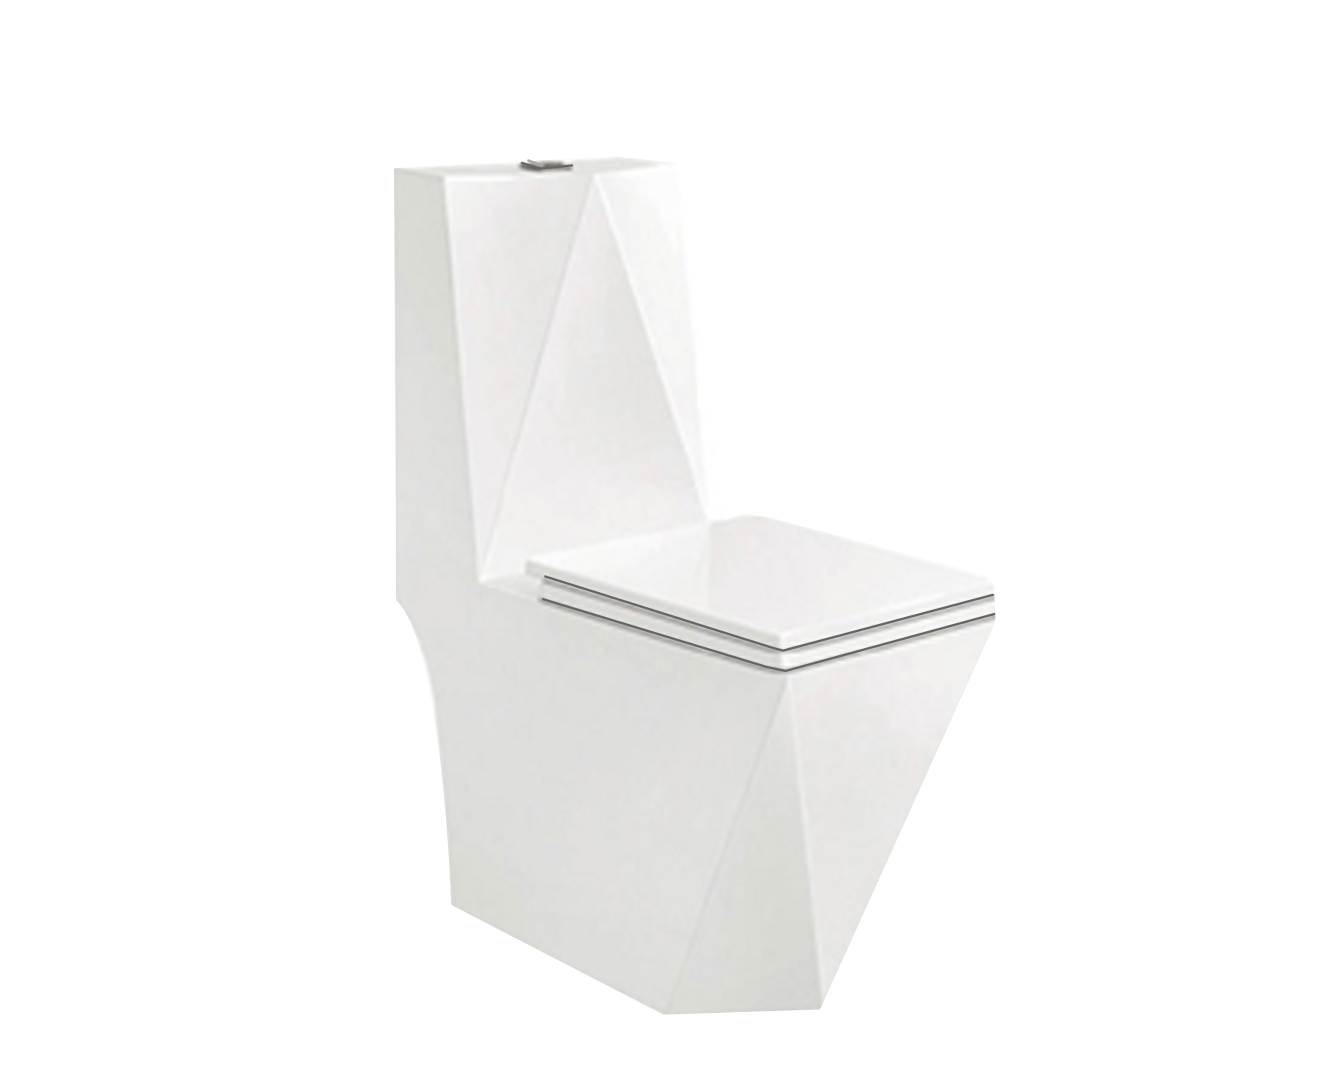 MJ3020-One Piece Toilet Elongated Floor Mounted, Daimonds style